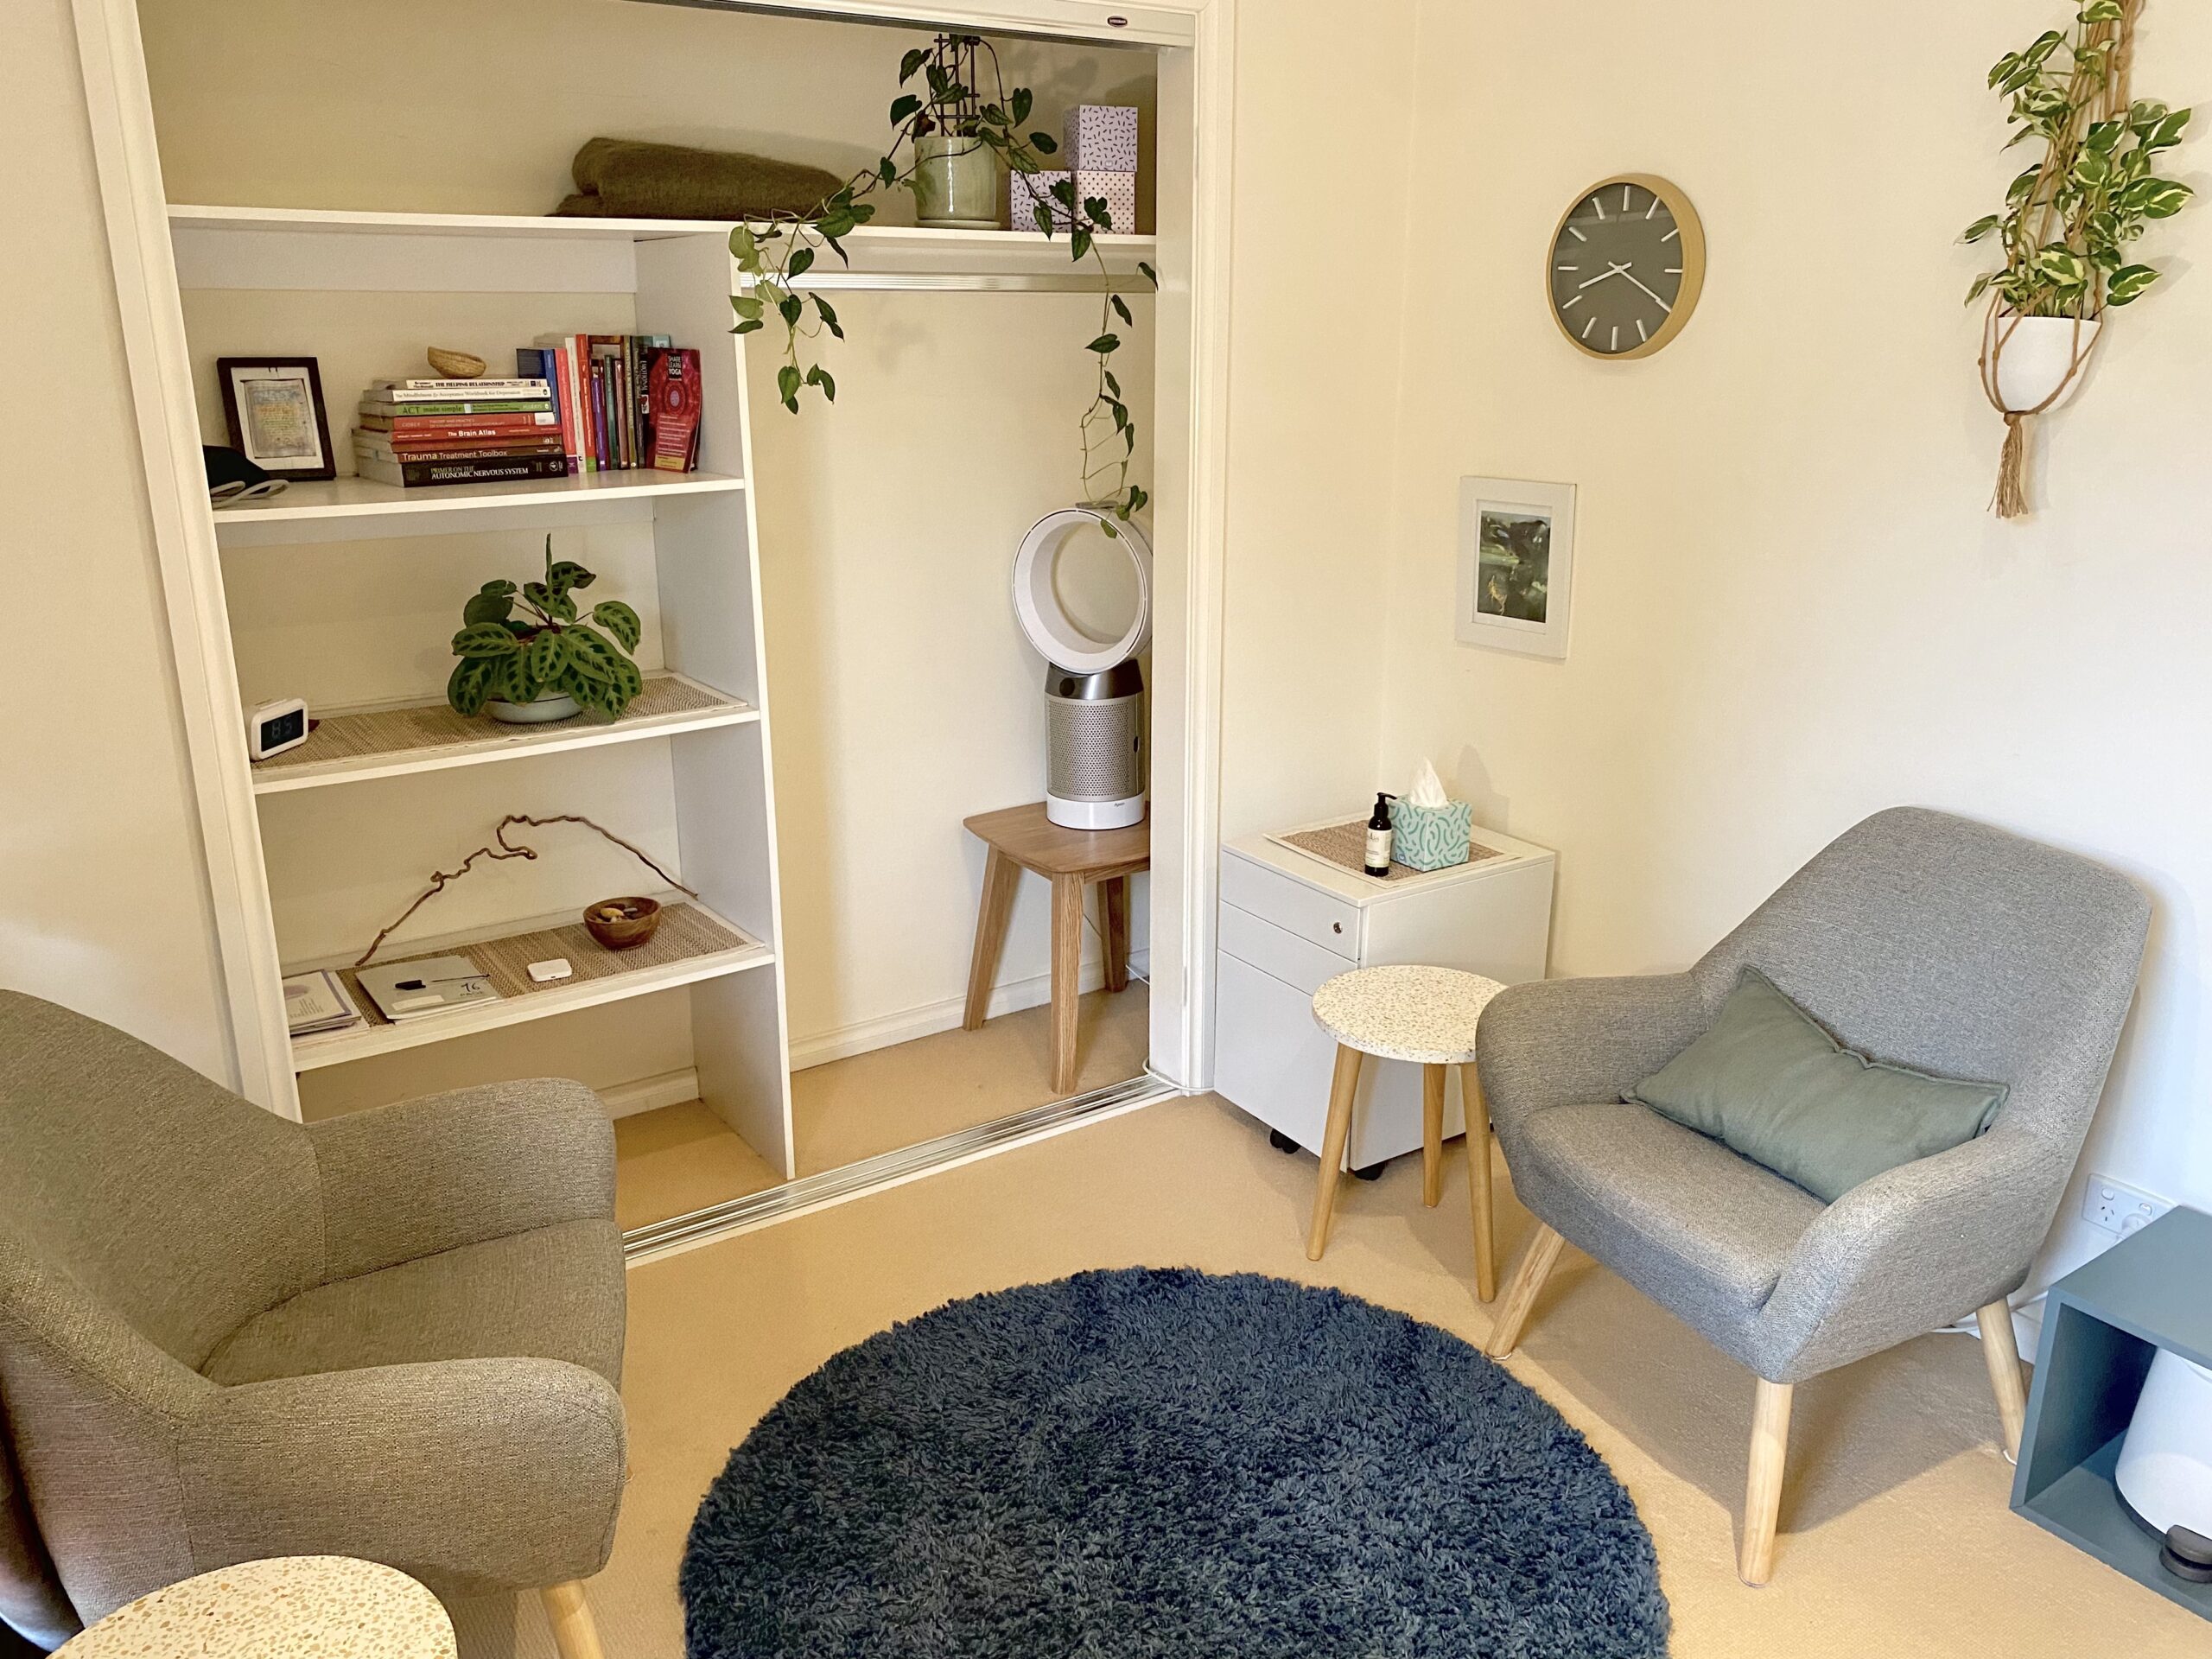 Comfortable office space with two arm chairs, coffee tables, plants, rug, wall clock and books